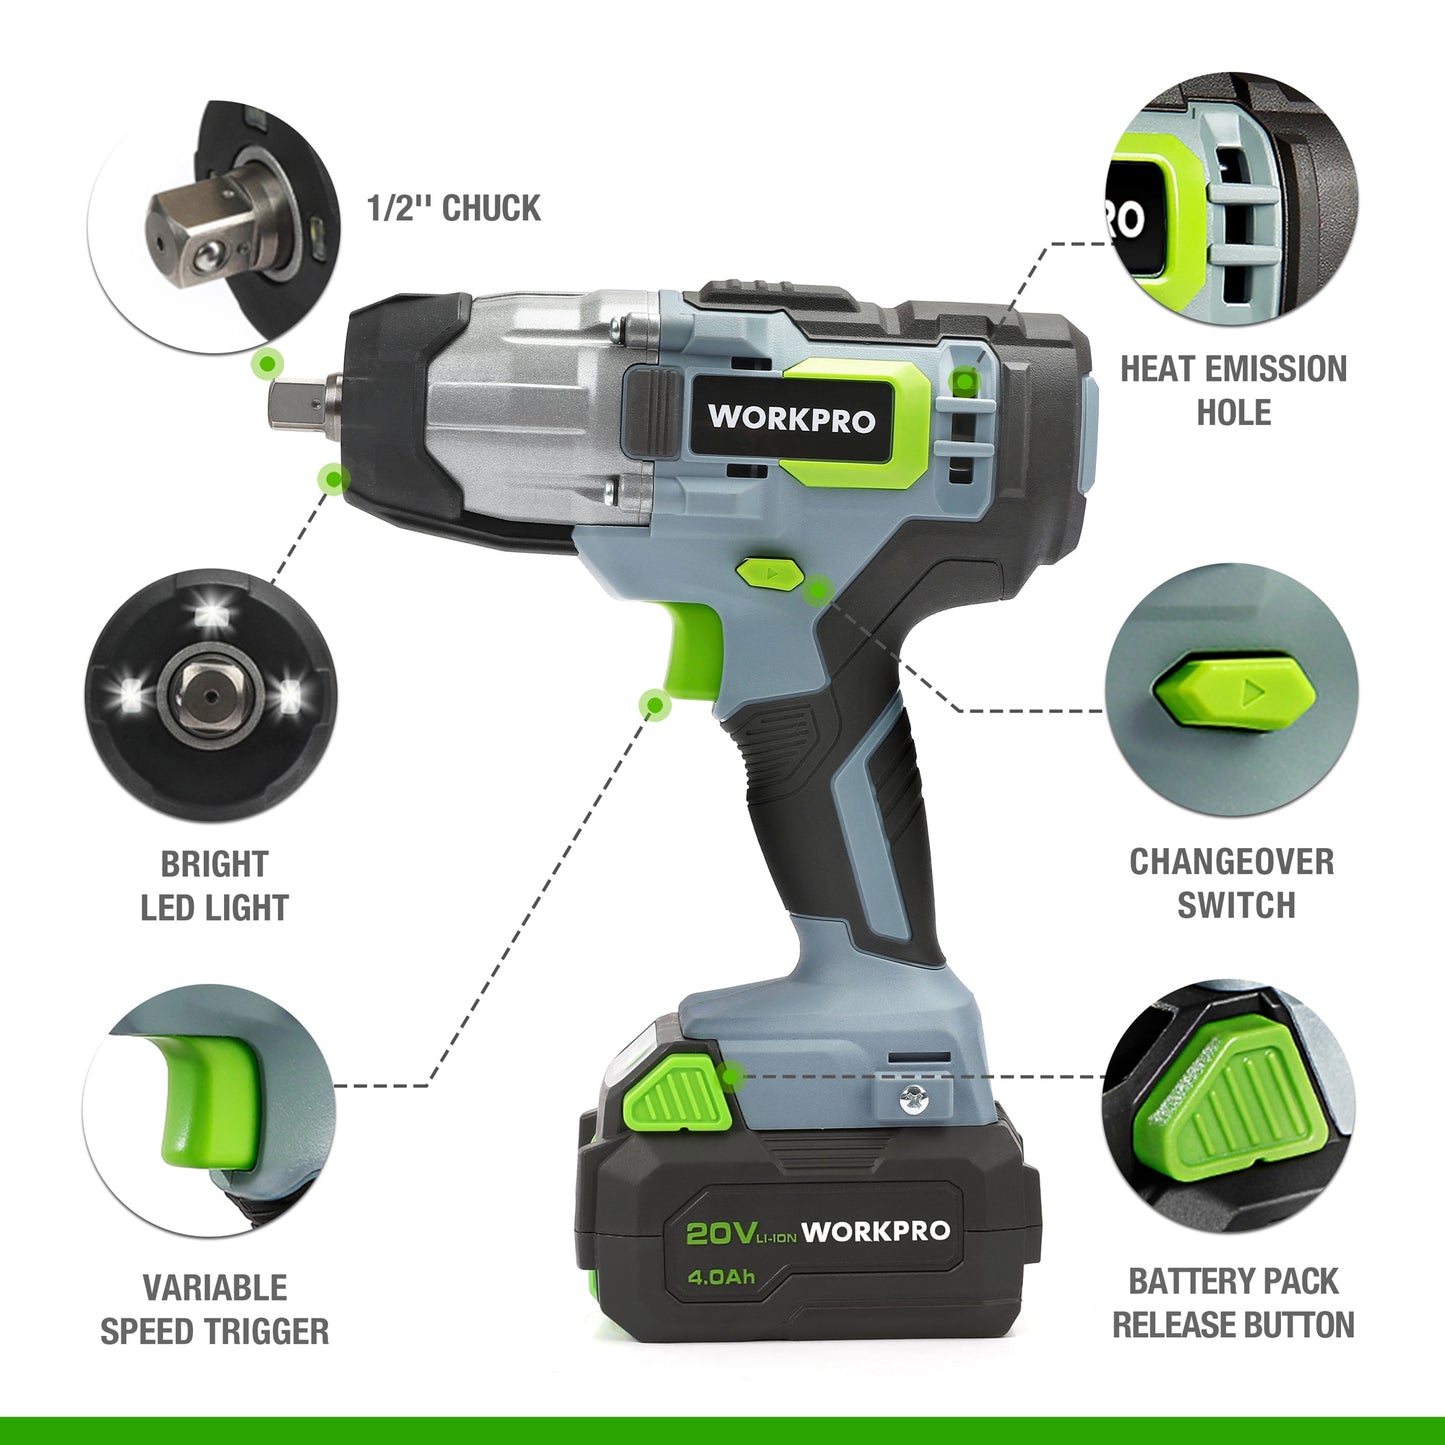 WORKPRO 20V Cordless Impact Wrench 1/2-inch 300N.M Max Torque 2.0-4.0Ah Li-ion Battery with Fast Charger